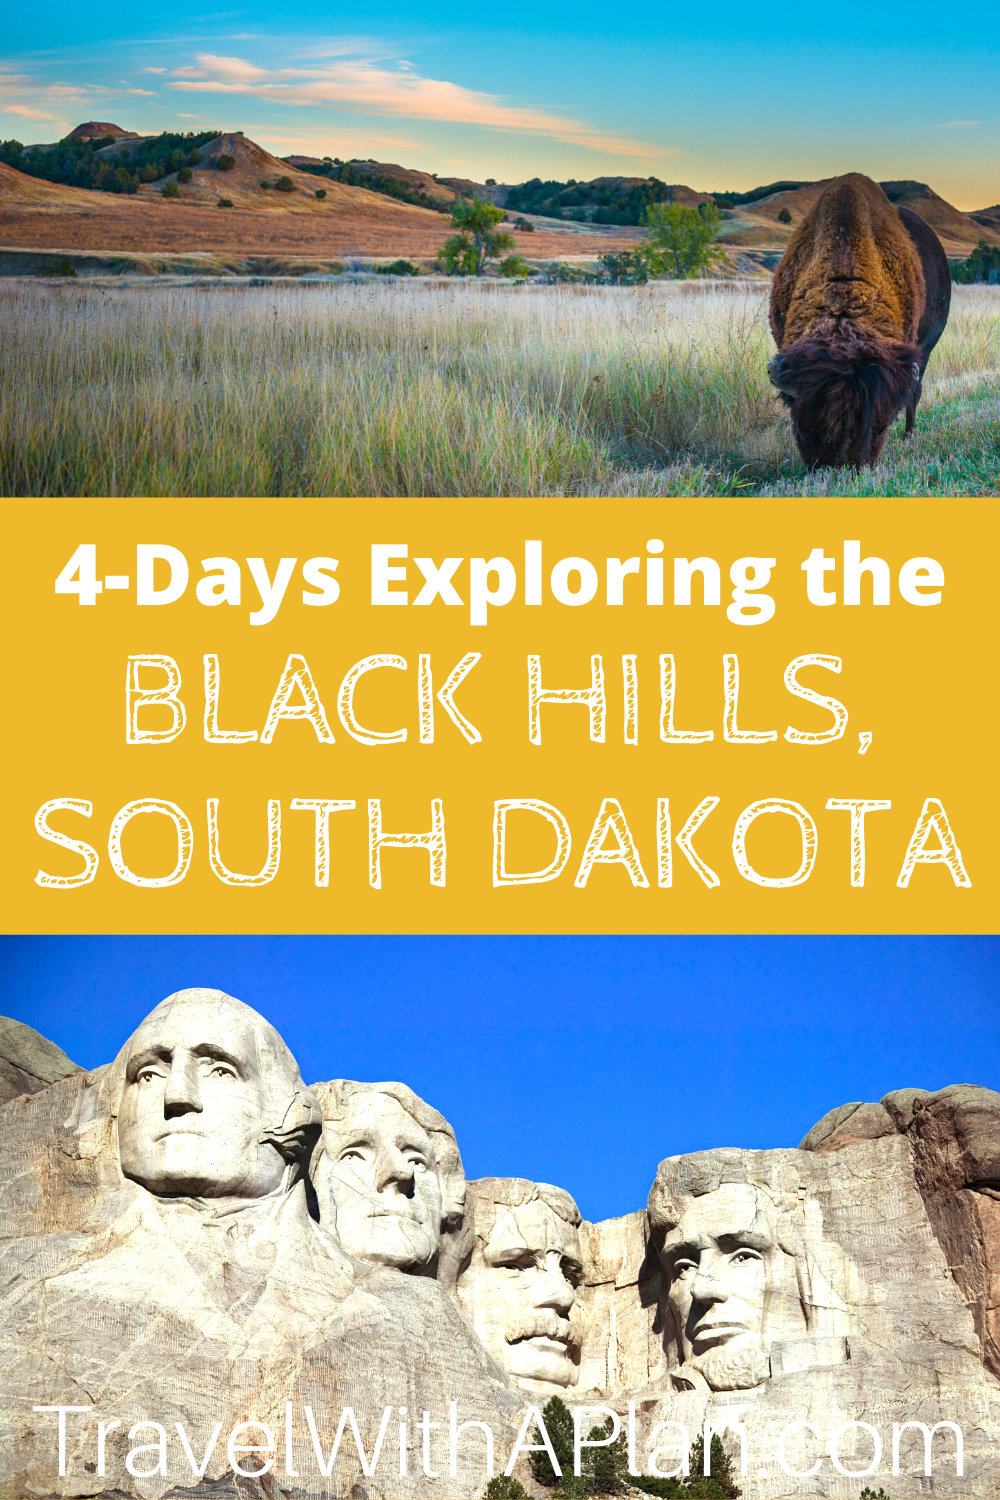 This 4-day Black Hills itinerary includes the best things to do Black Hills for families with children!  Don't miss any of the iconic sights and attractions that makes this one of the most popular U.S. bucket list destination!  We ordered the sights and attractions perfectly!  #blackhillsitinerary #bestthingstodointheblackhills #thingstodointheBlackHills #southdakotawithkids #blackhillsfamilyvacation #4dayblackhillsitinerary